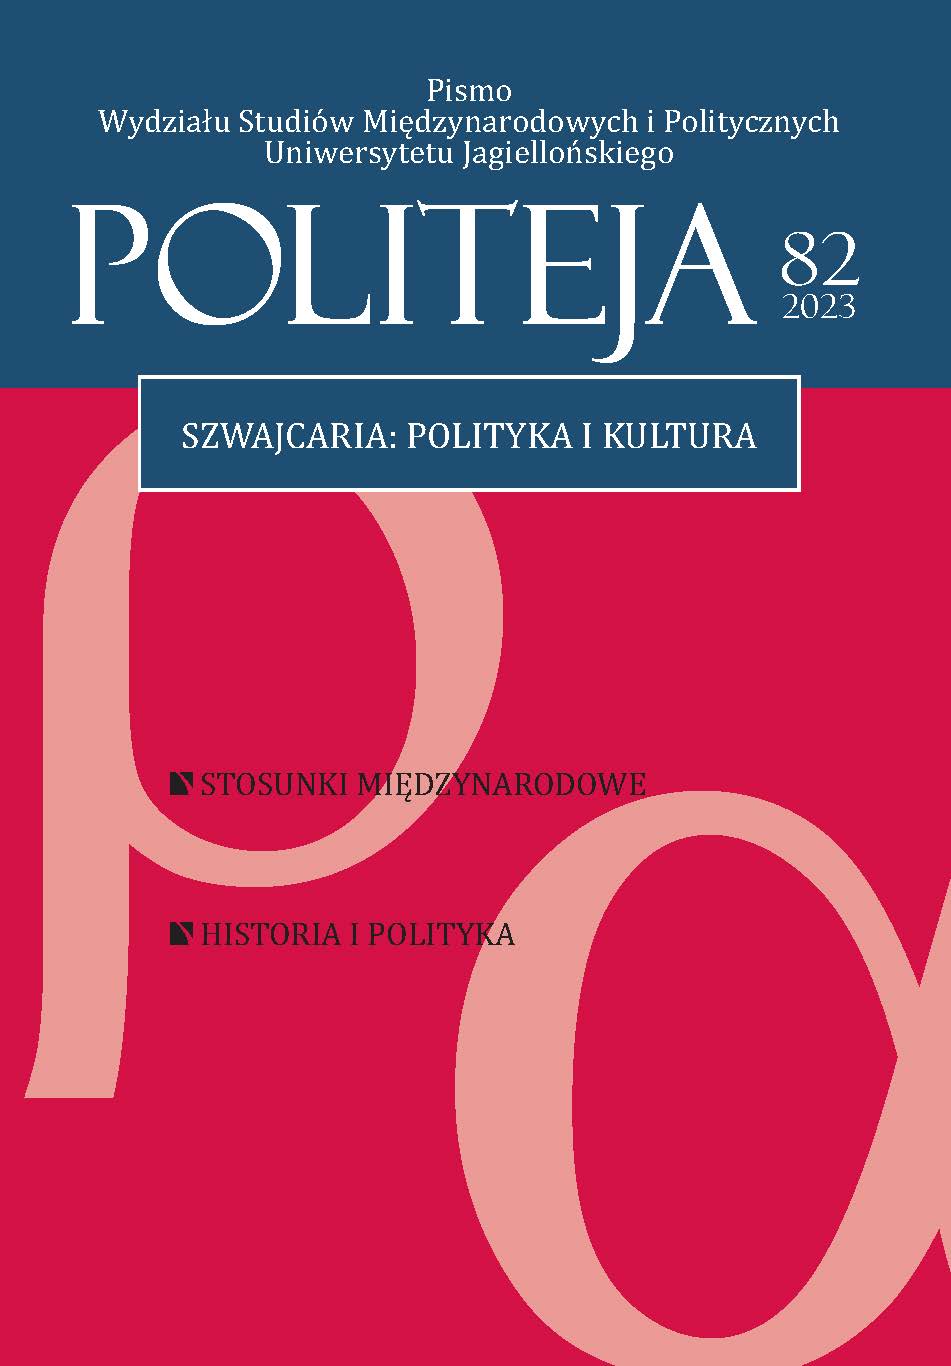 Concepts of and Proposals for Constitutional Reforms in the Views of Polish Political Societies in Exile in 1830s: The Case of Young Poland